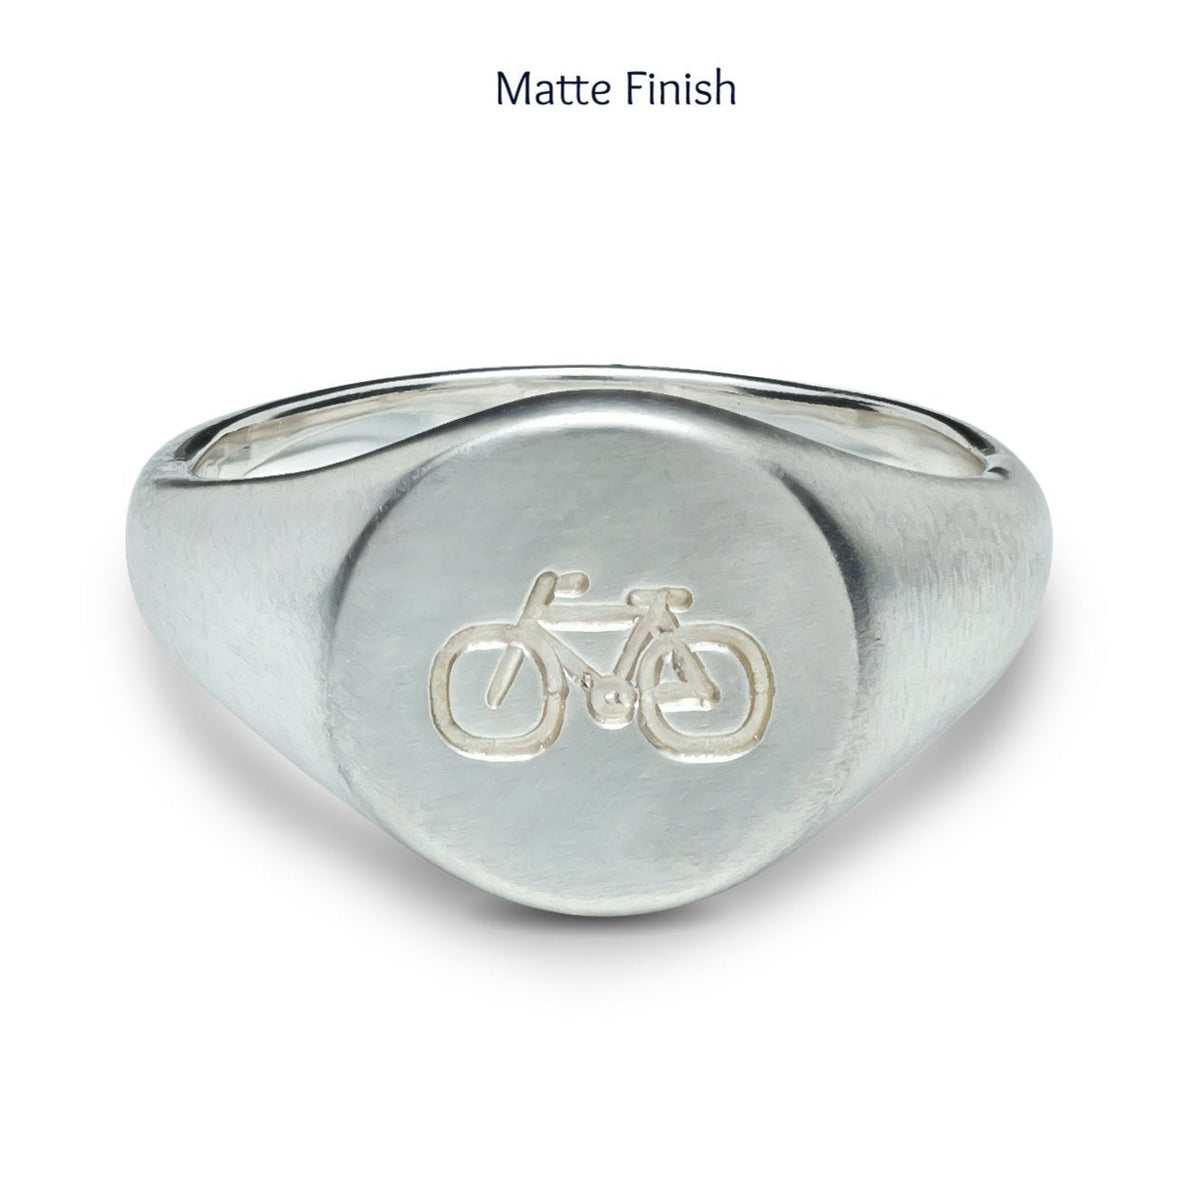 matte finish mans silver signet ring engraved with bike symbol from off the map jewellery